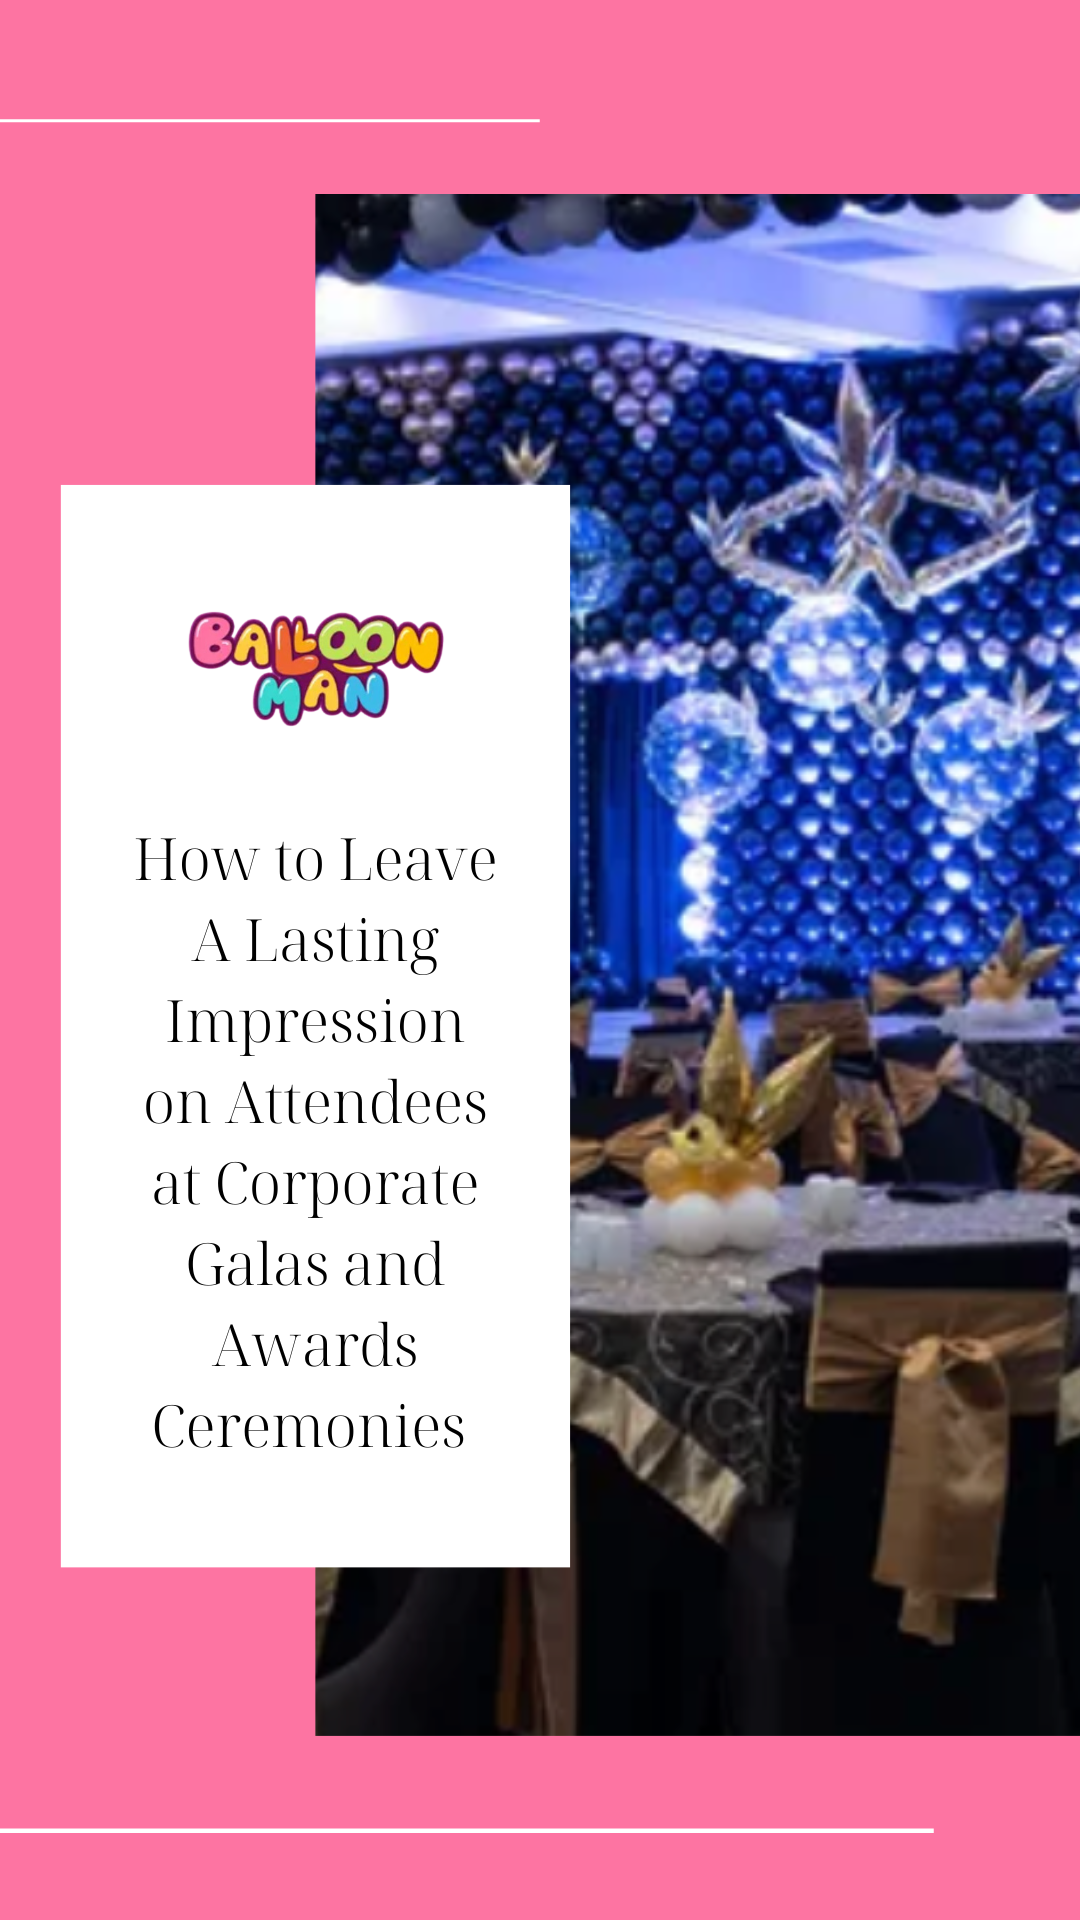 How to Leave A Lasting Impression on Attendees at Corporate Galas and Awards Ceremonies